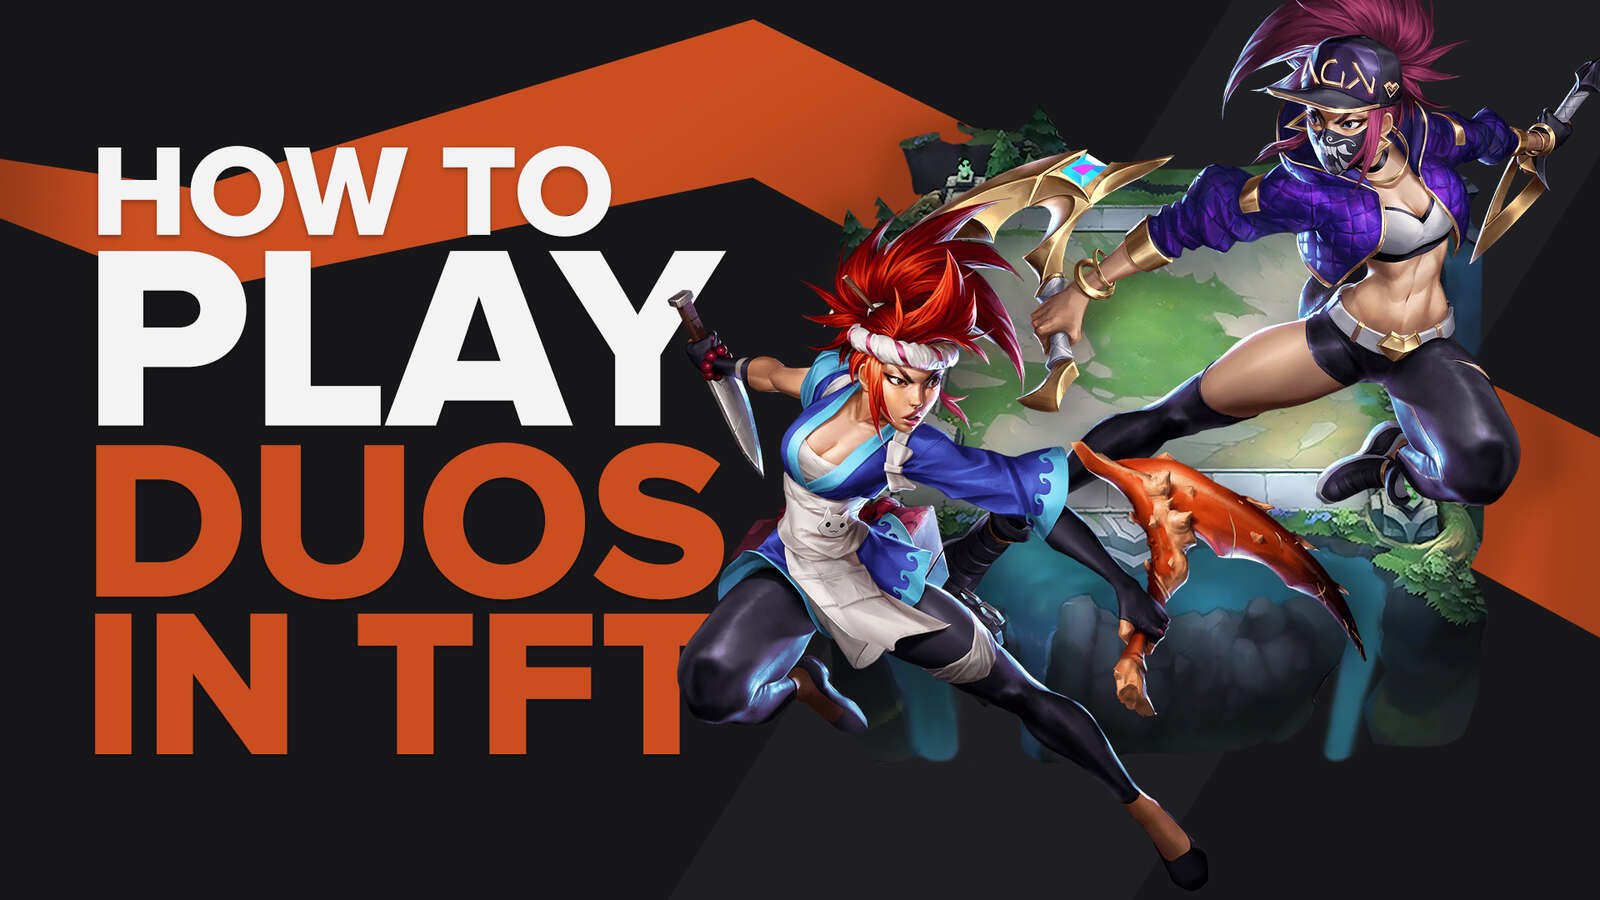 All You Need to Know About How to Play Duos in TFT